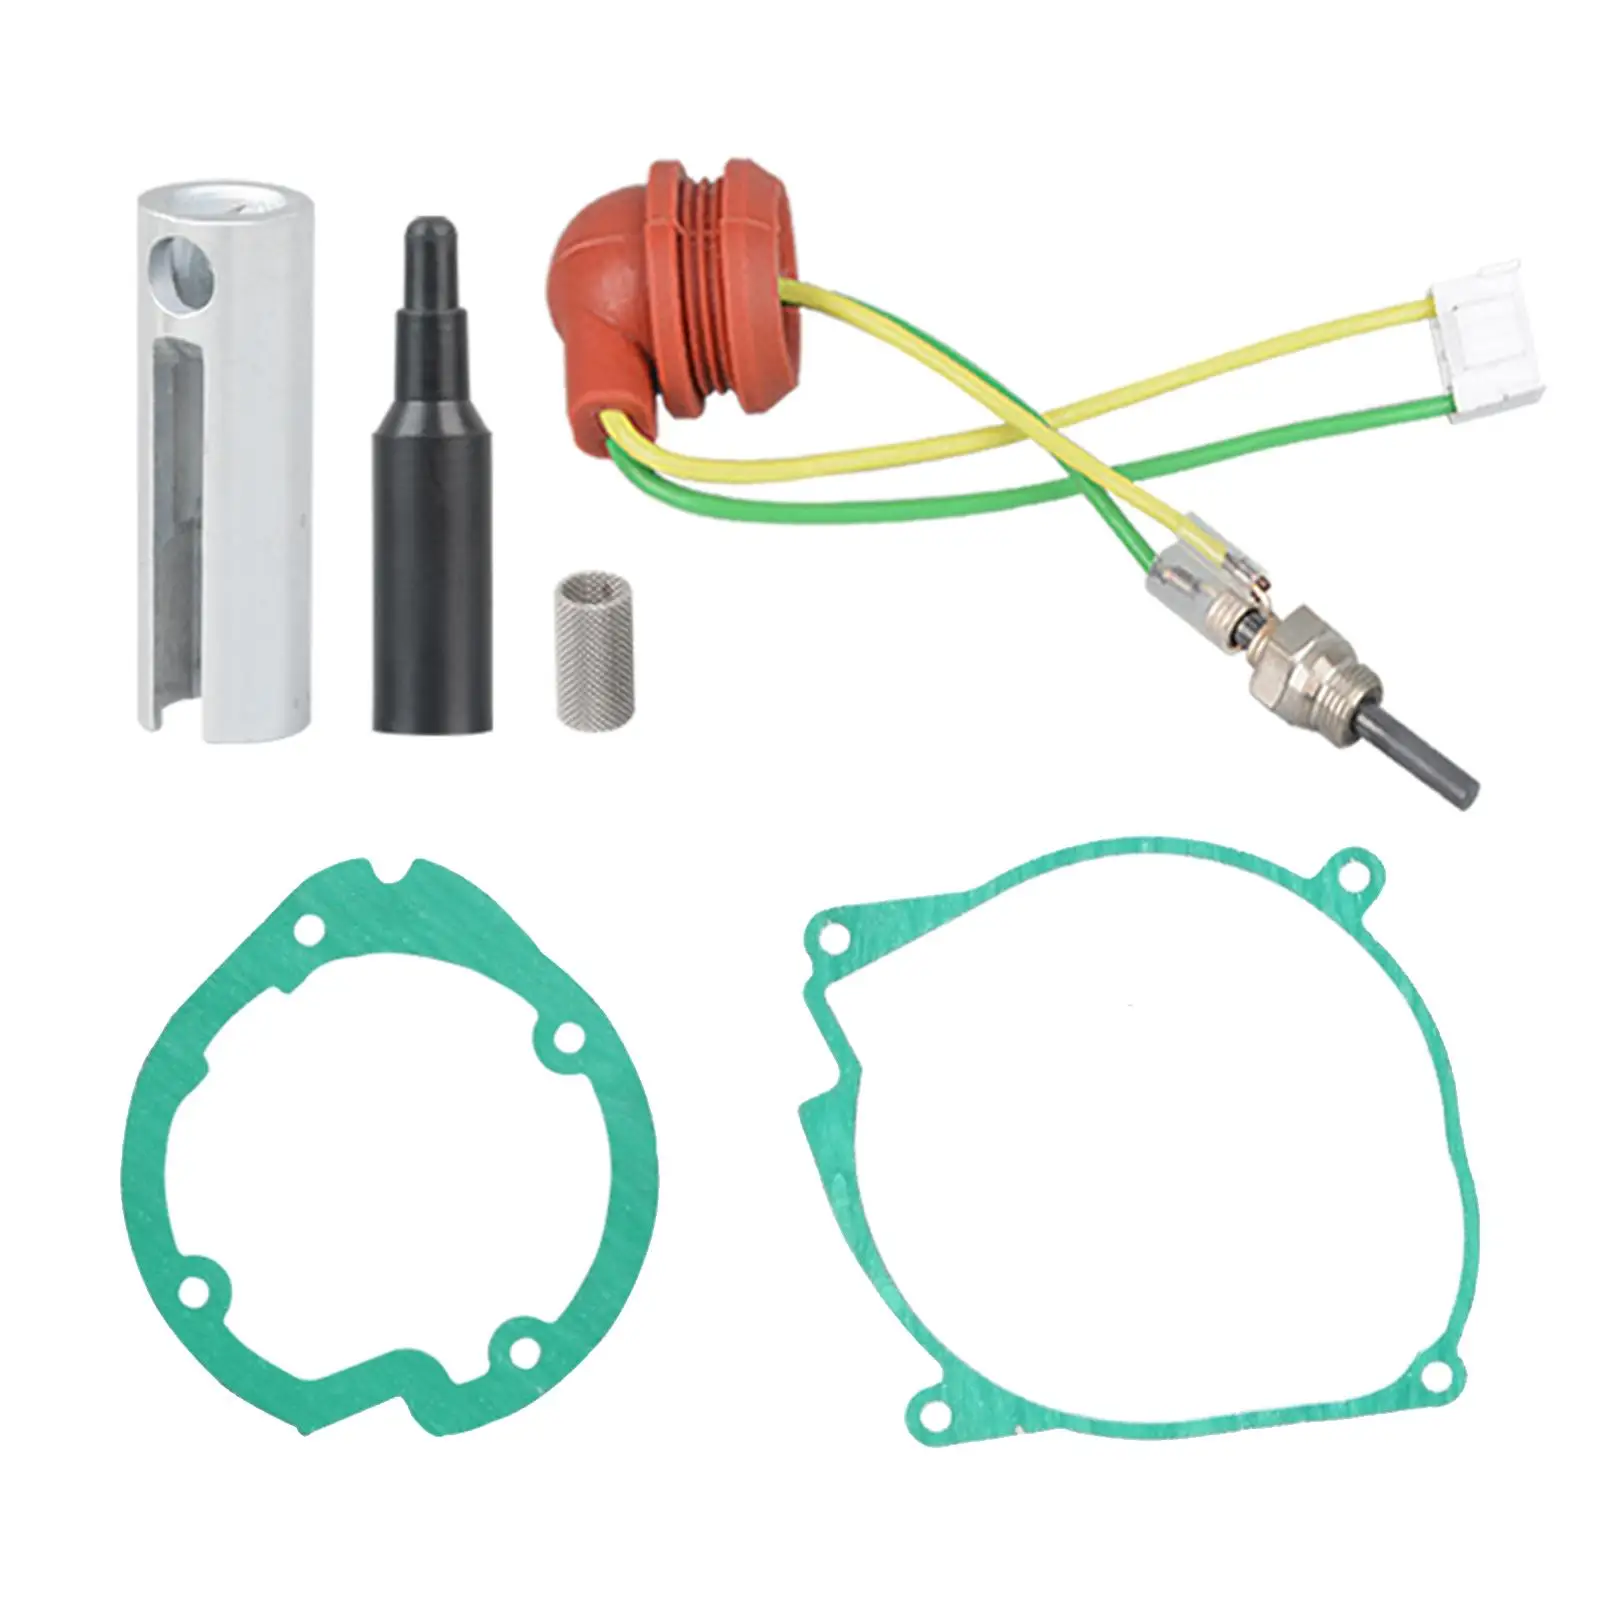 Glow Plug Repair Kit Supplies Gasket Replace Net for 12V 2kW Parking Heater